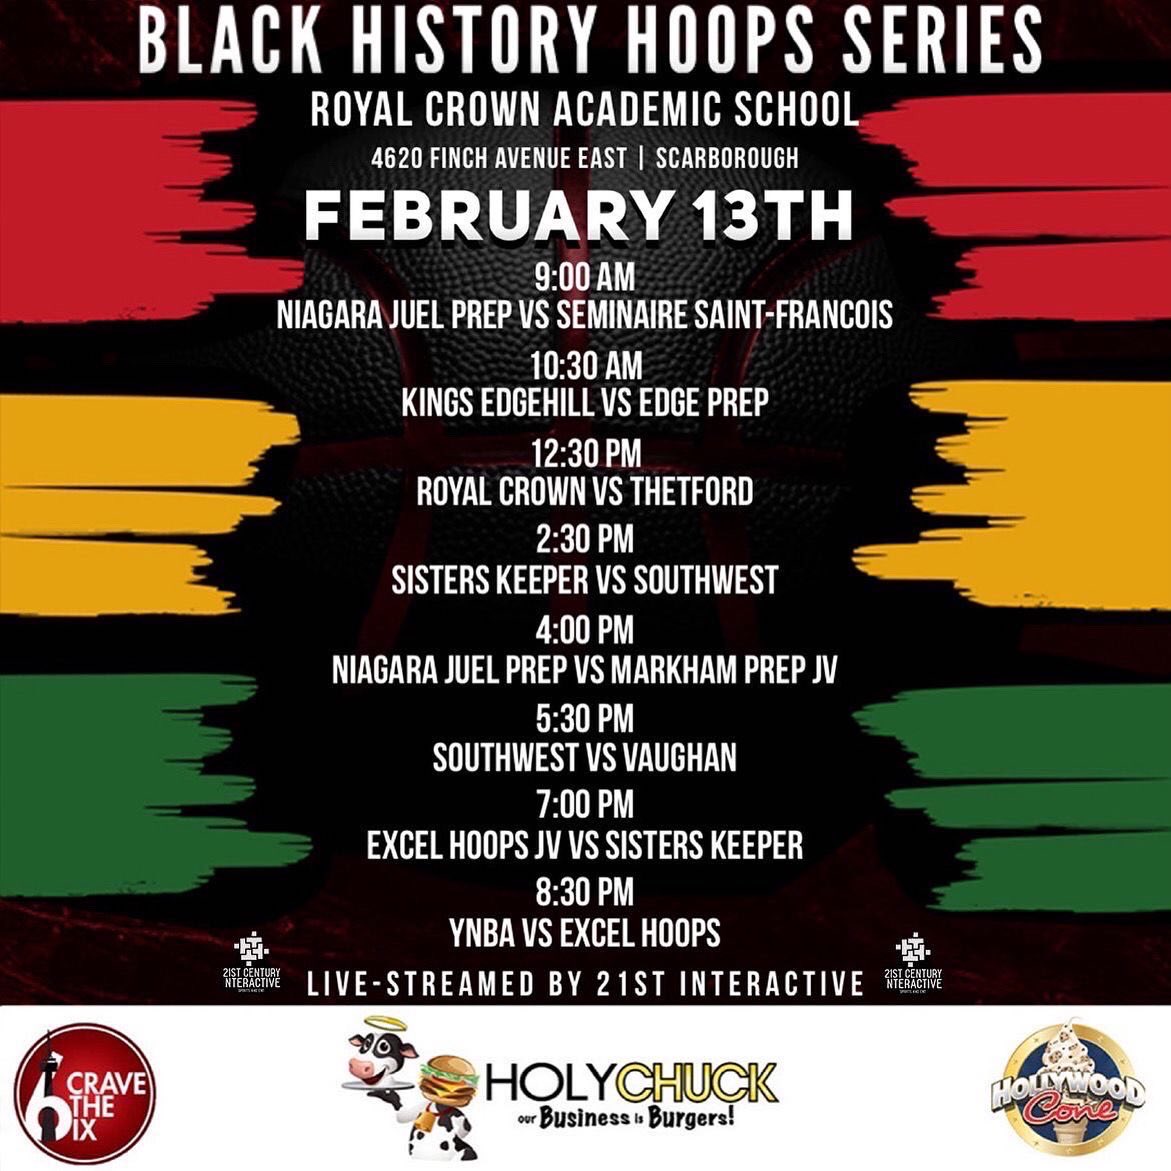 #CANLETES BLACK HISTORY HOOPS SERIES 

🗓 FEB 11-13 2022
📍 #CrestwoodPrep & #RoyalCrown 
💻   canletes.ca/black_history_…

visit 21st-Ent.com  to watch live streamed events during Black History Month!!